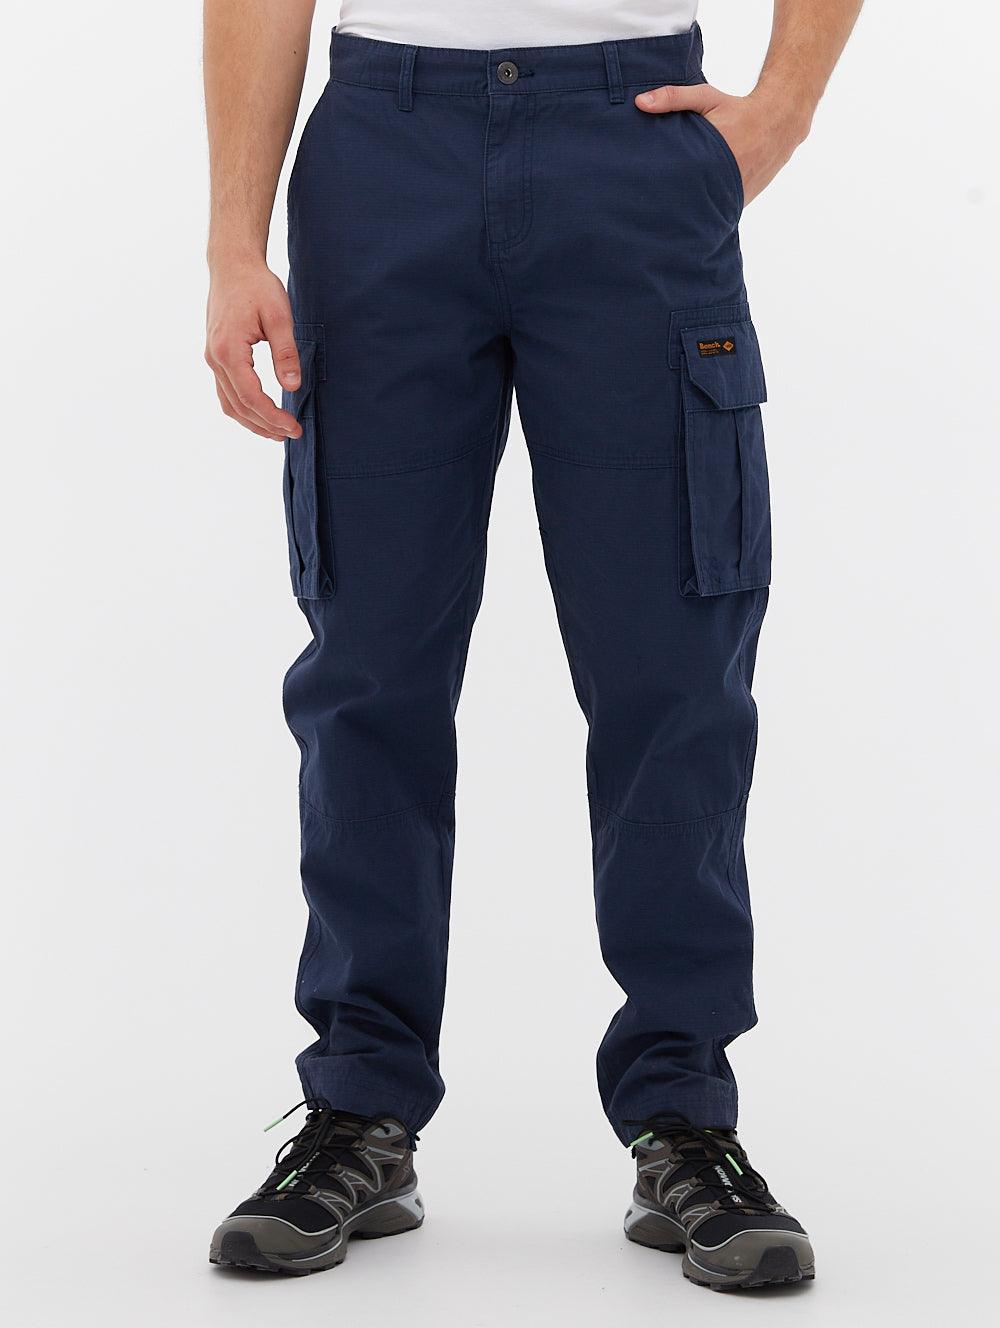 Bench Toronto Trouser 31 Leg Length workwears work wears clothes multiple  pockets mens mens pants thick tradesmen 5055201326430 5055201326447  5055201326454 5055201326461 5055201326478 5055201326485  Home Bargains